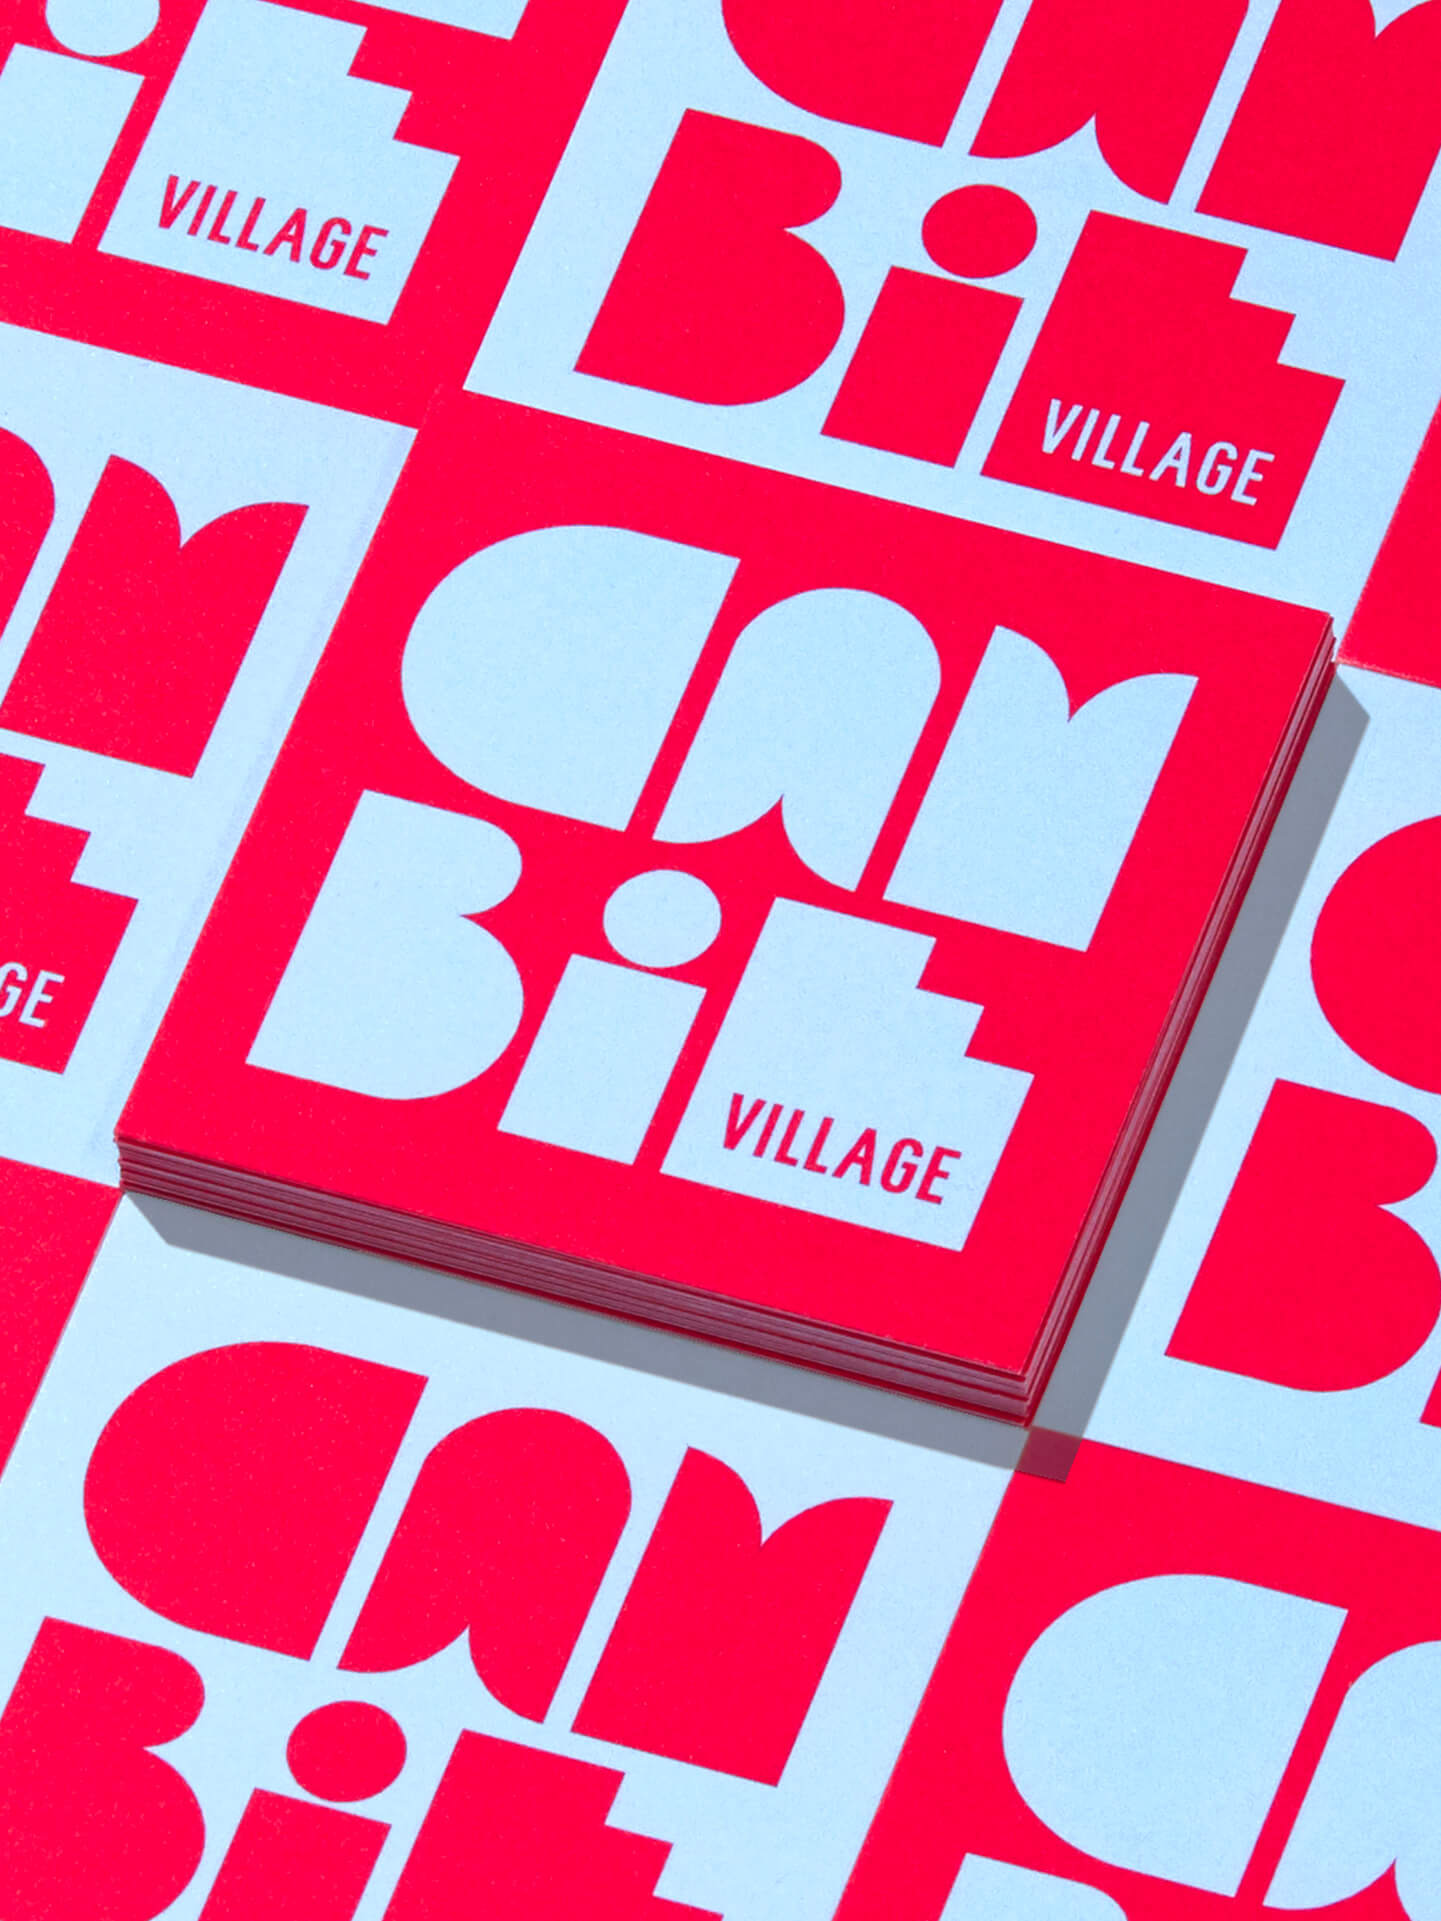 cambie village brand identity and business card